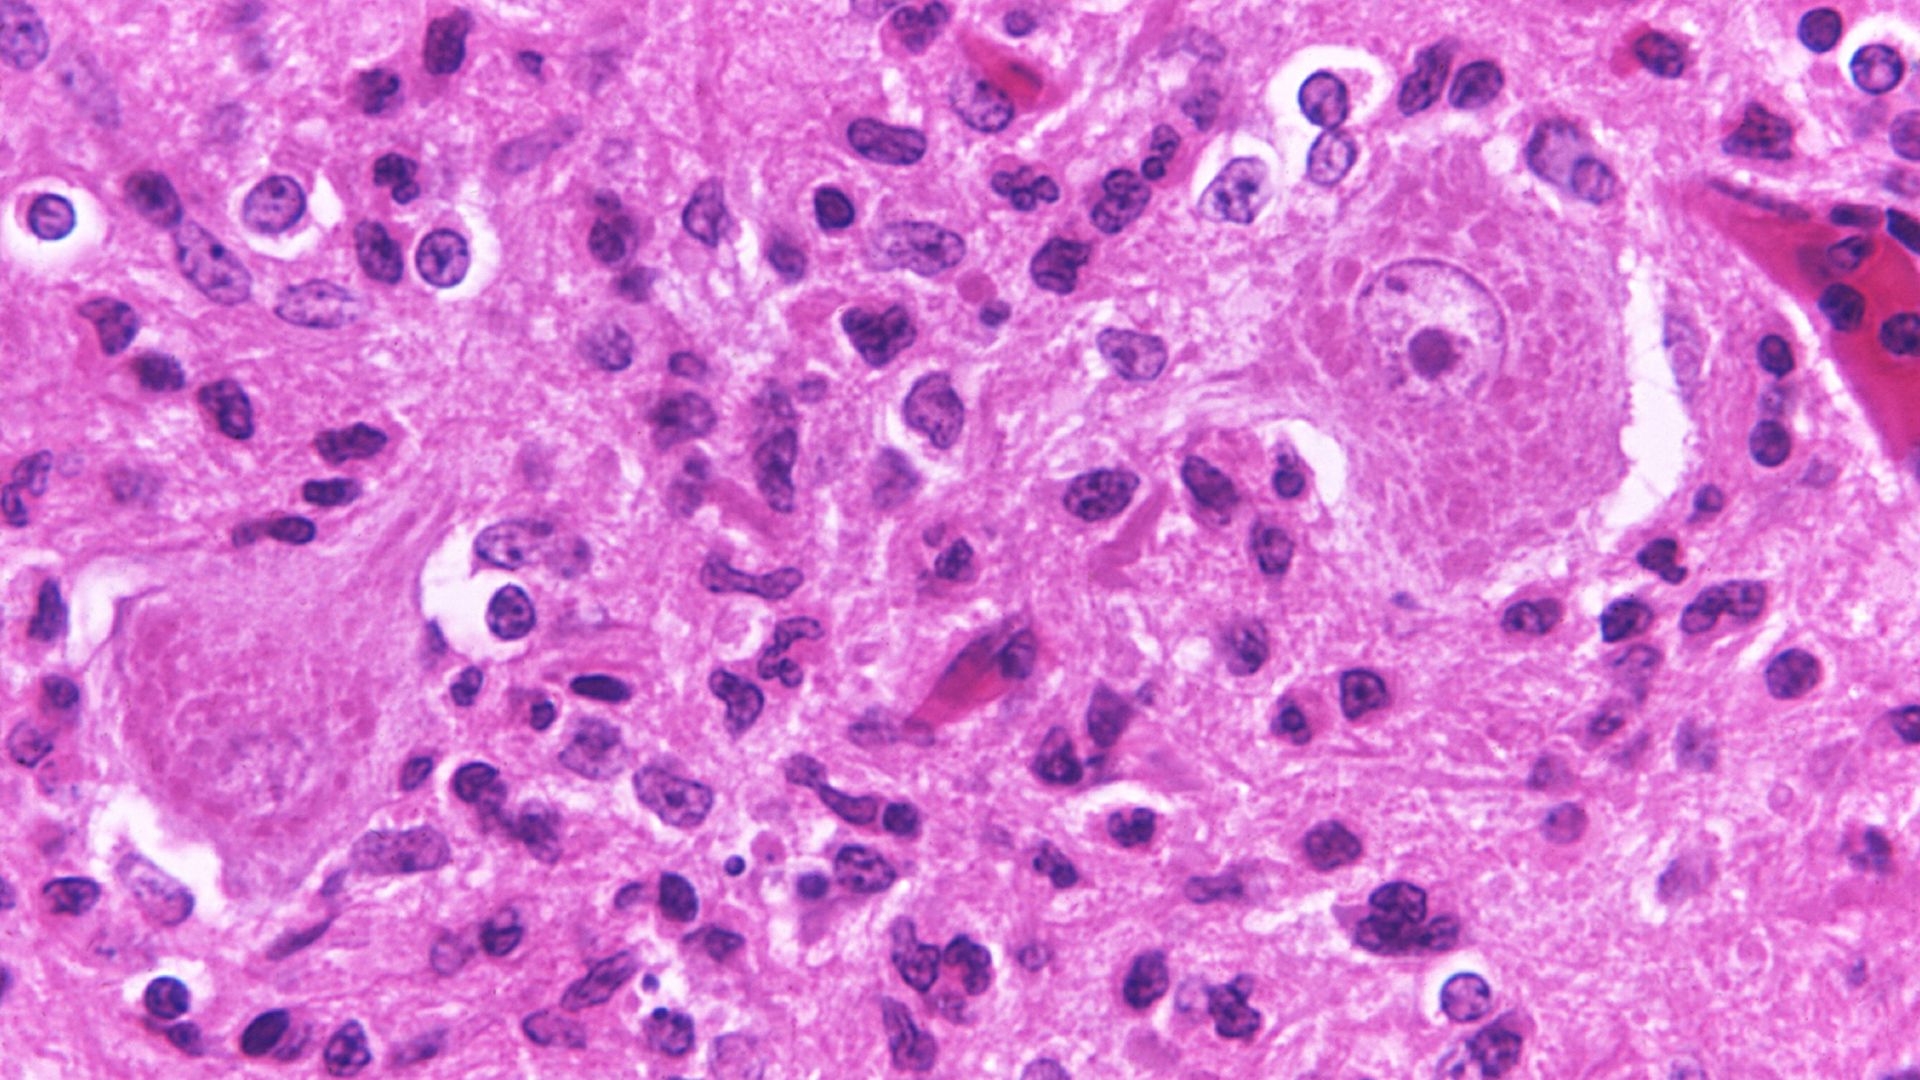 A photomicrograph of brain tissue from a rabies encephalitis patient.